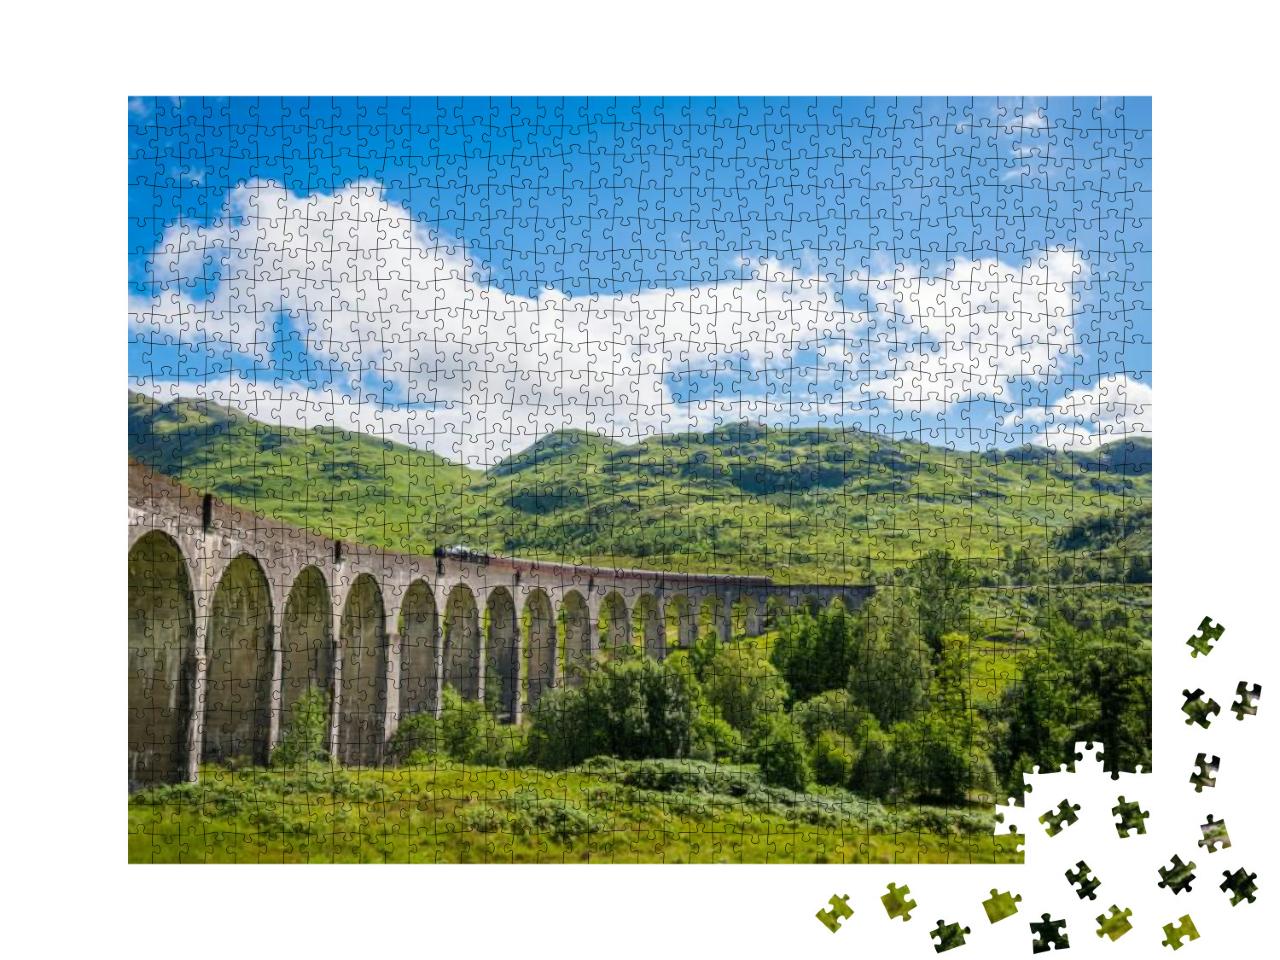 Steam Train Crossing the Famous Glenfinnan Viaduct in Wes... Jigsaw Puzzle with 1000 pieces